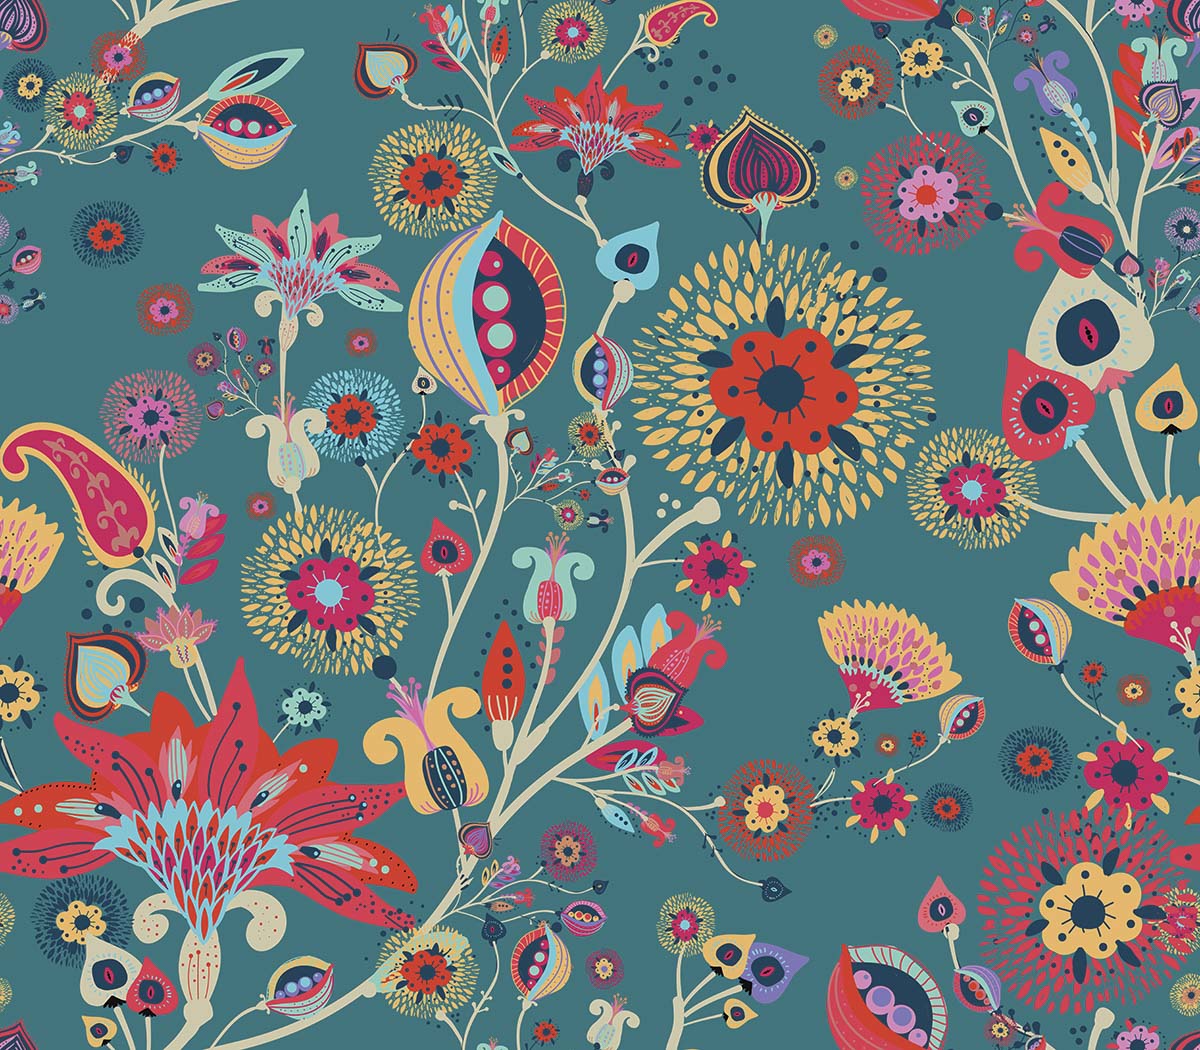 A colorful floral pattern on a teal background